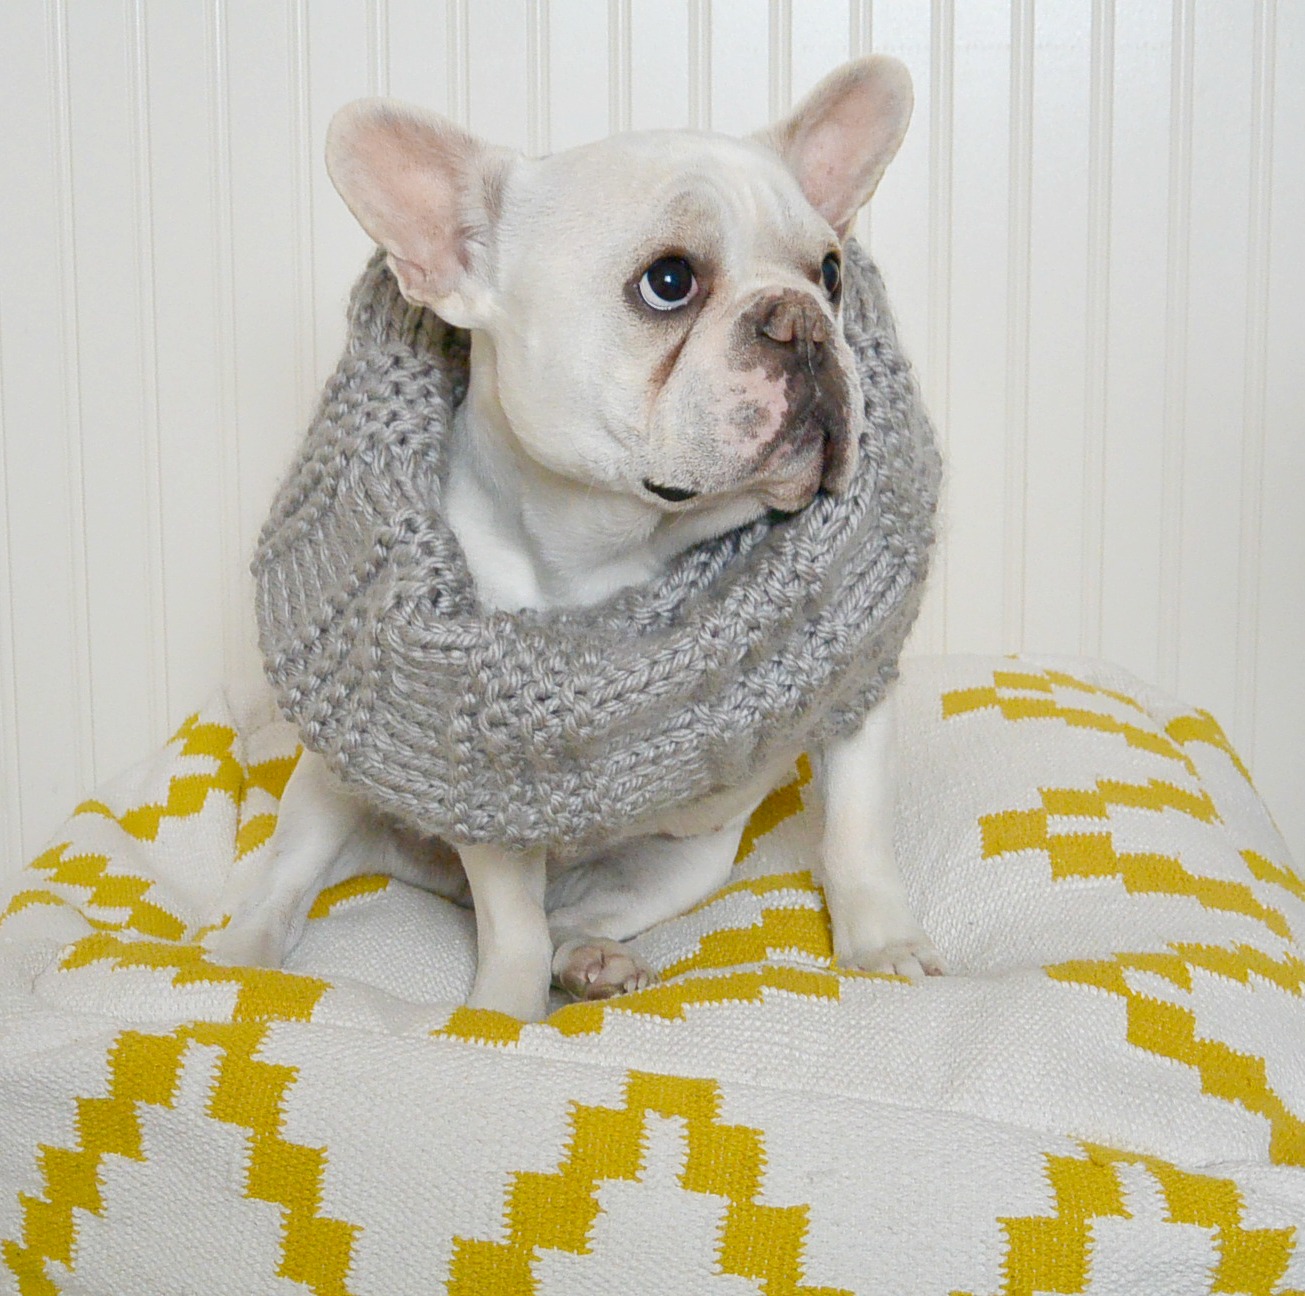 Scarves and Cowls – Oh My!